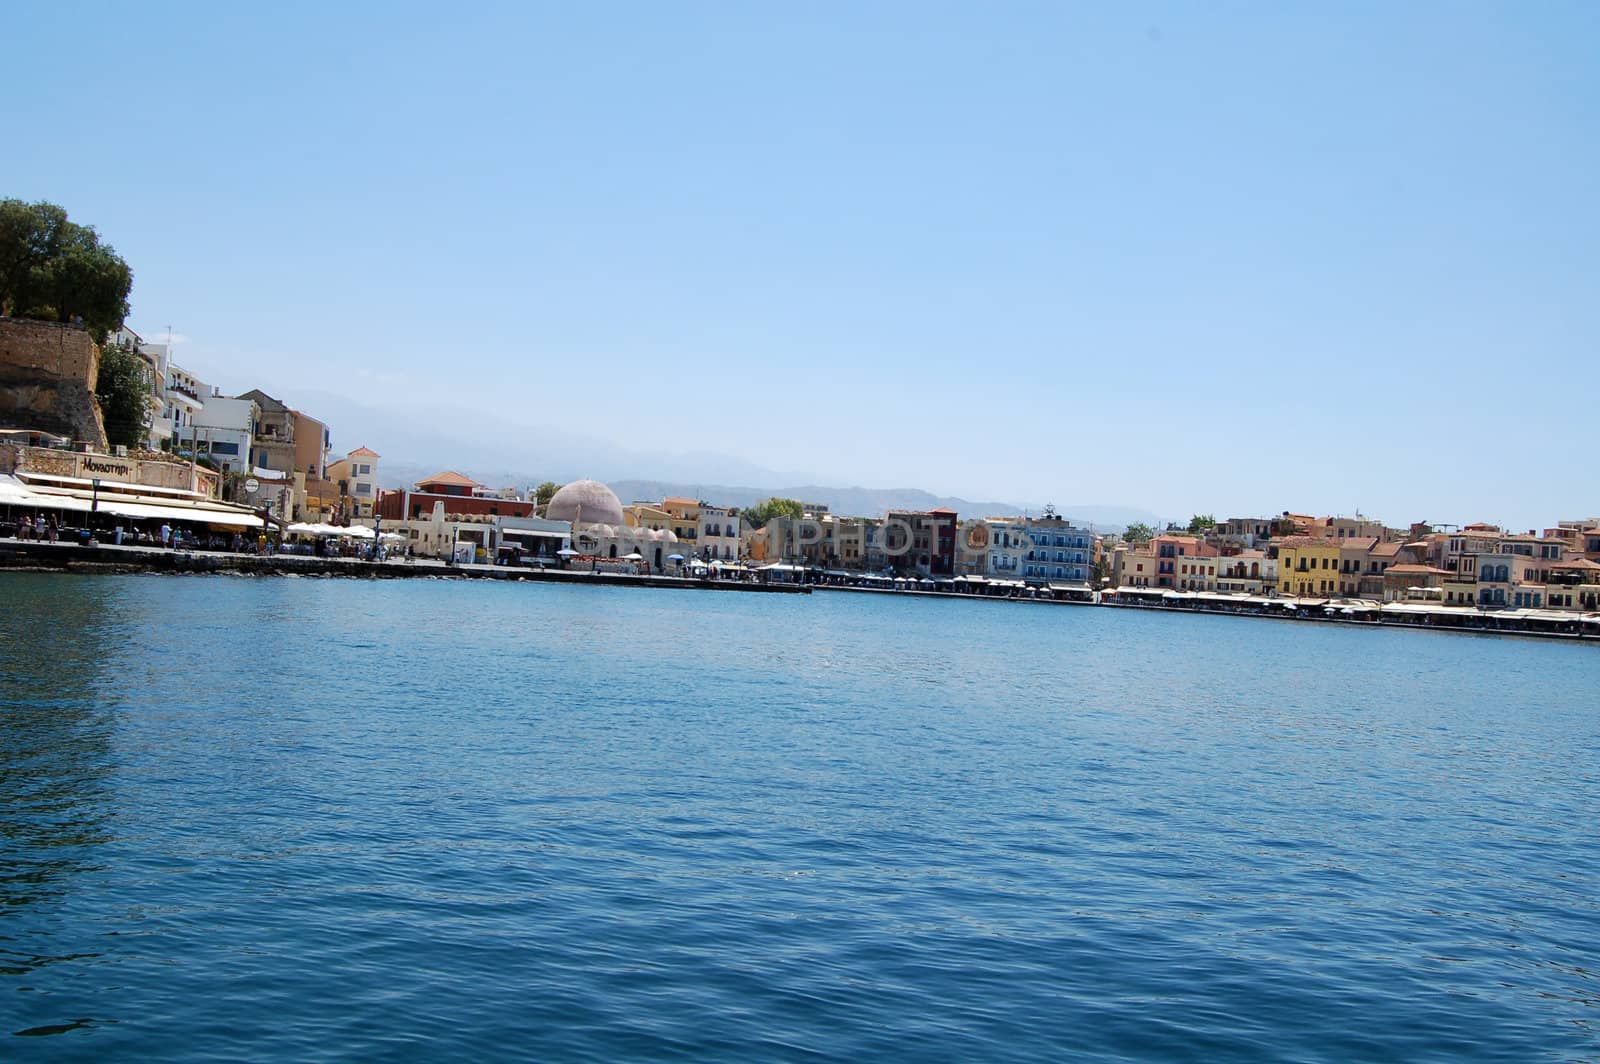 Old port of Chania, Crete by mojly